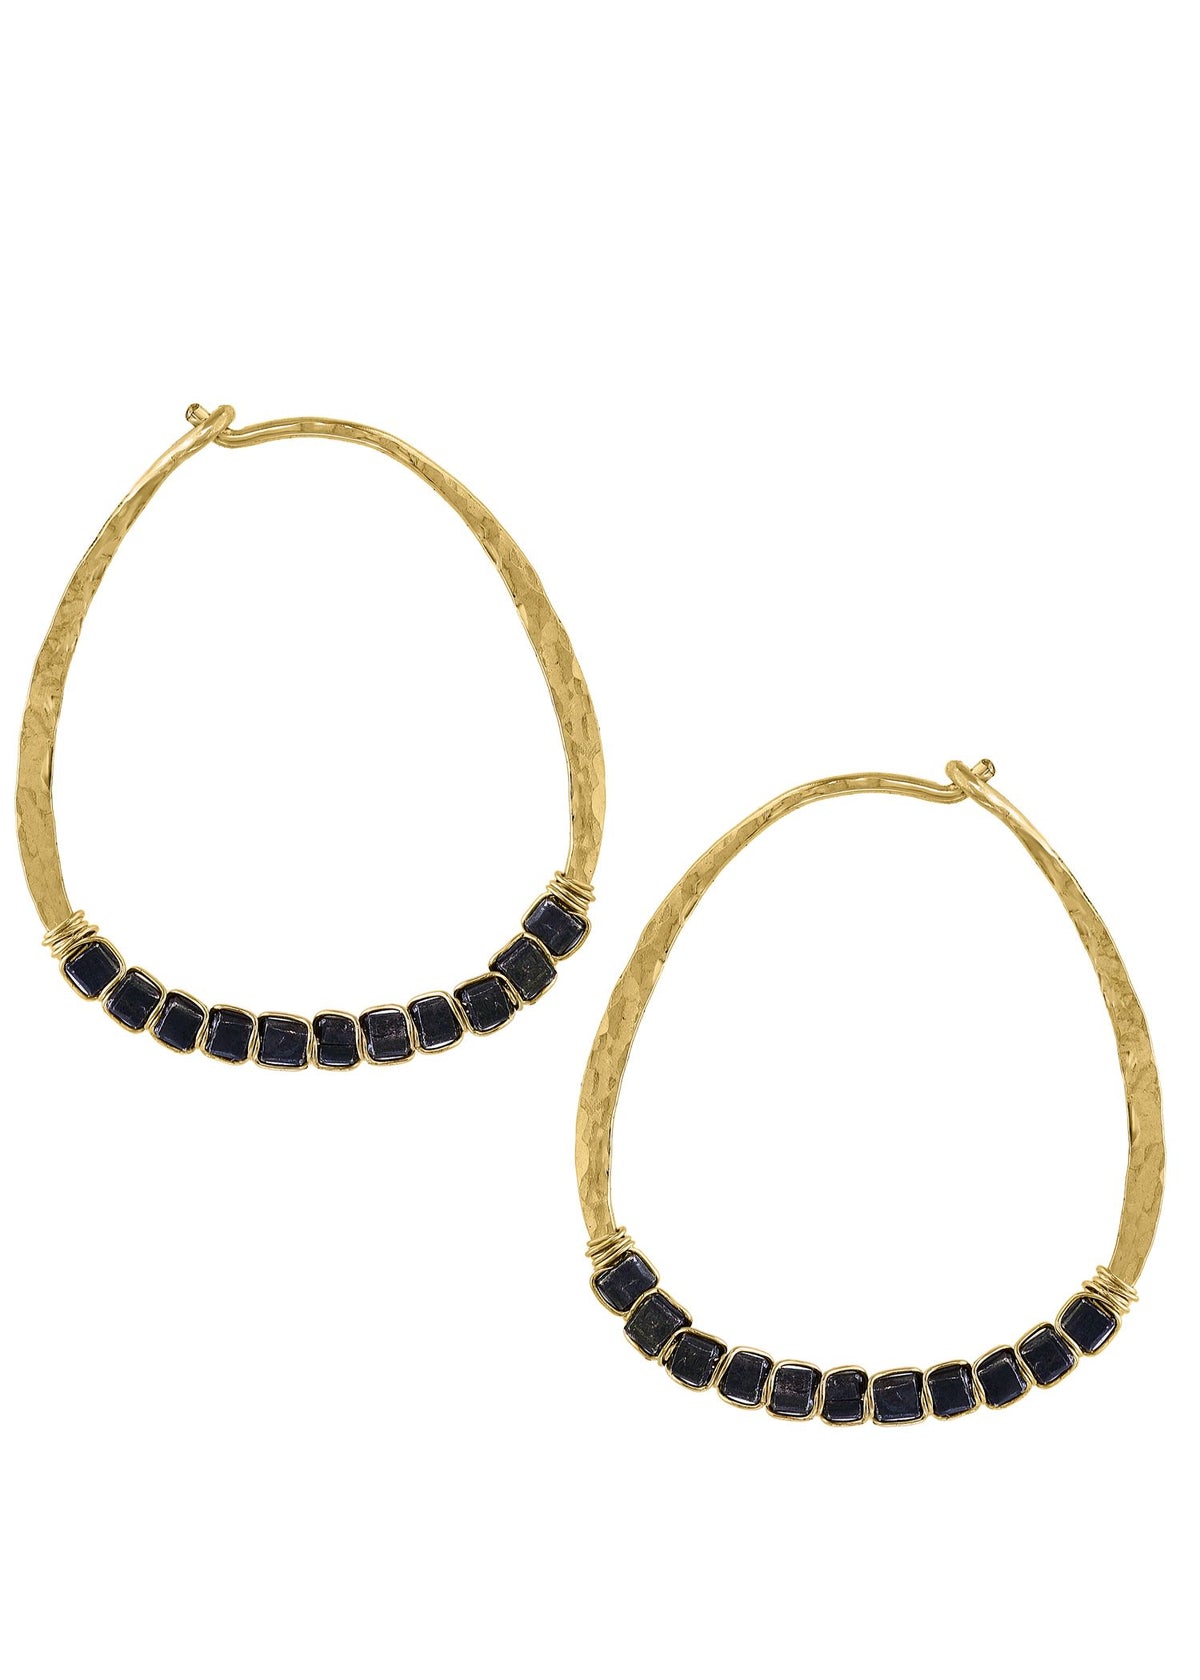 14k gold fill Blackened sterling silver Mixed metal Earrings measure 1&quot; in length and 7/8&quot; in width Handmade in our Los Angeles studio